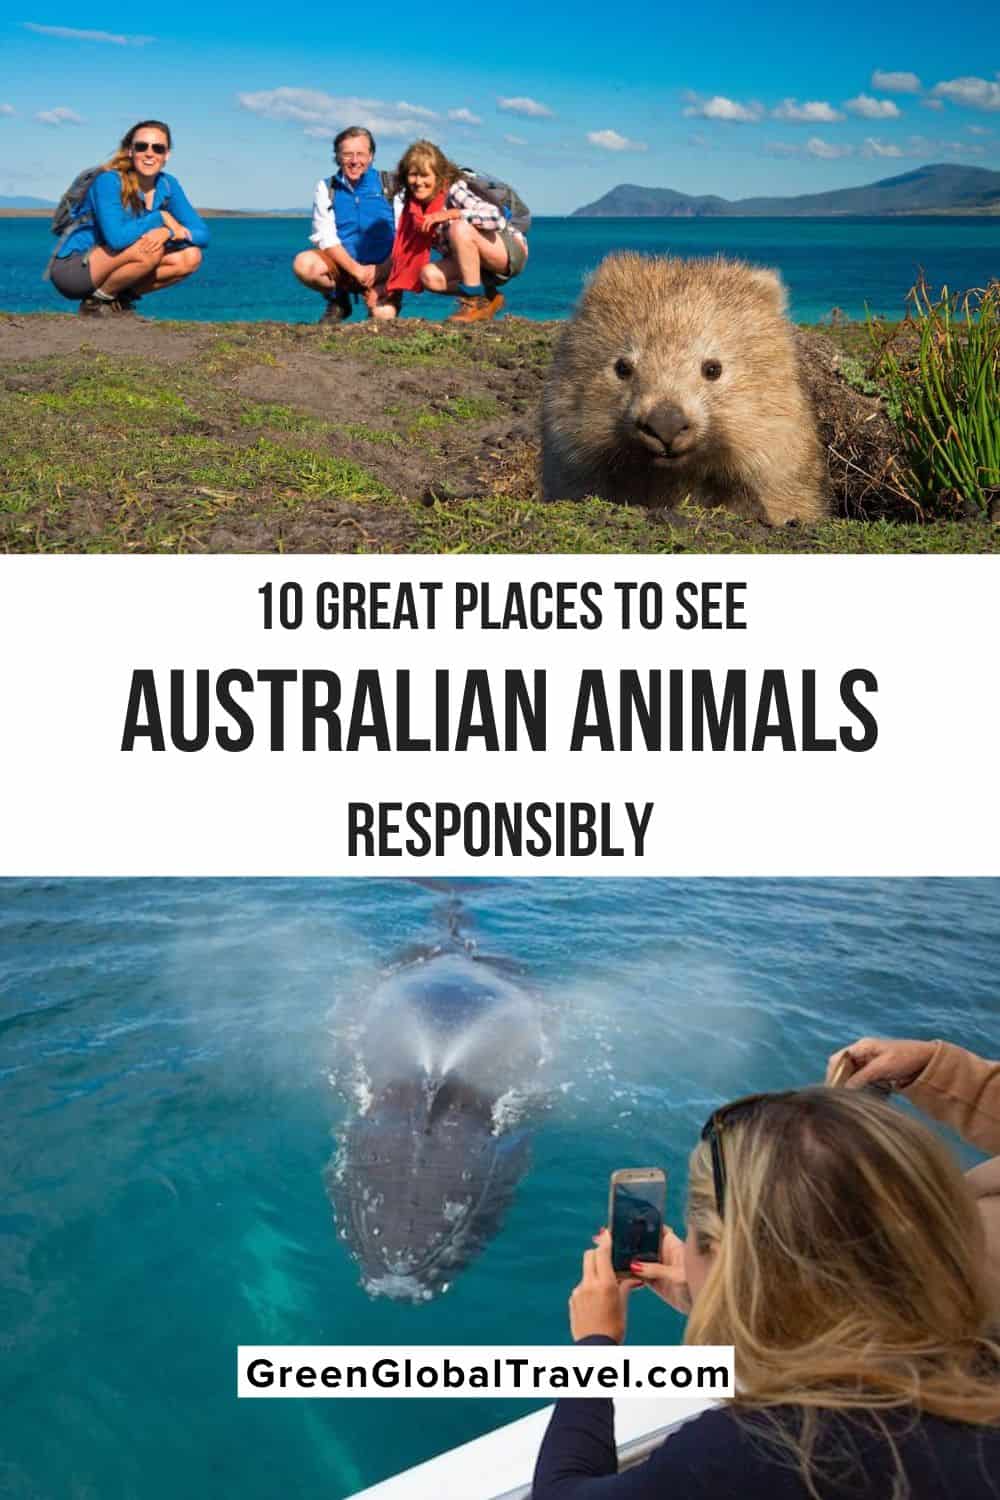 10 Great Places to See Wildlife in Australia Responsibly, including the Daintree Rainforest, Kangaroo Island, Maria Island, the Murray River and more!